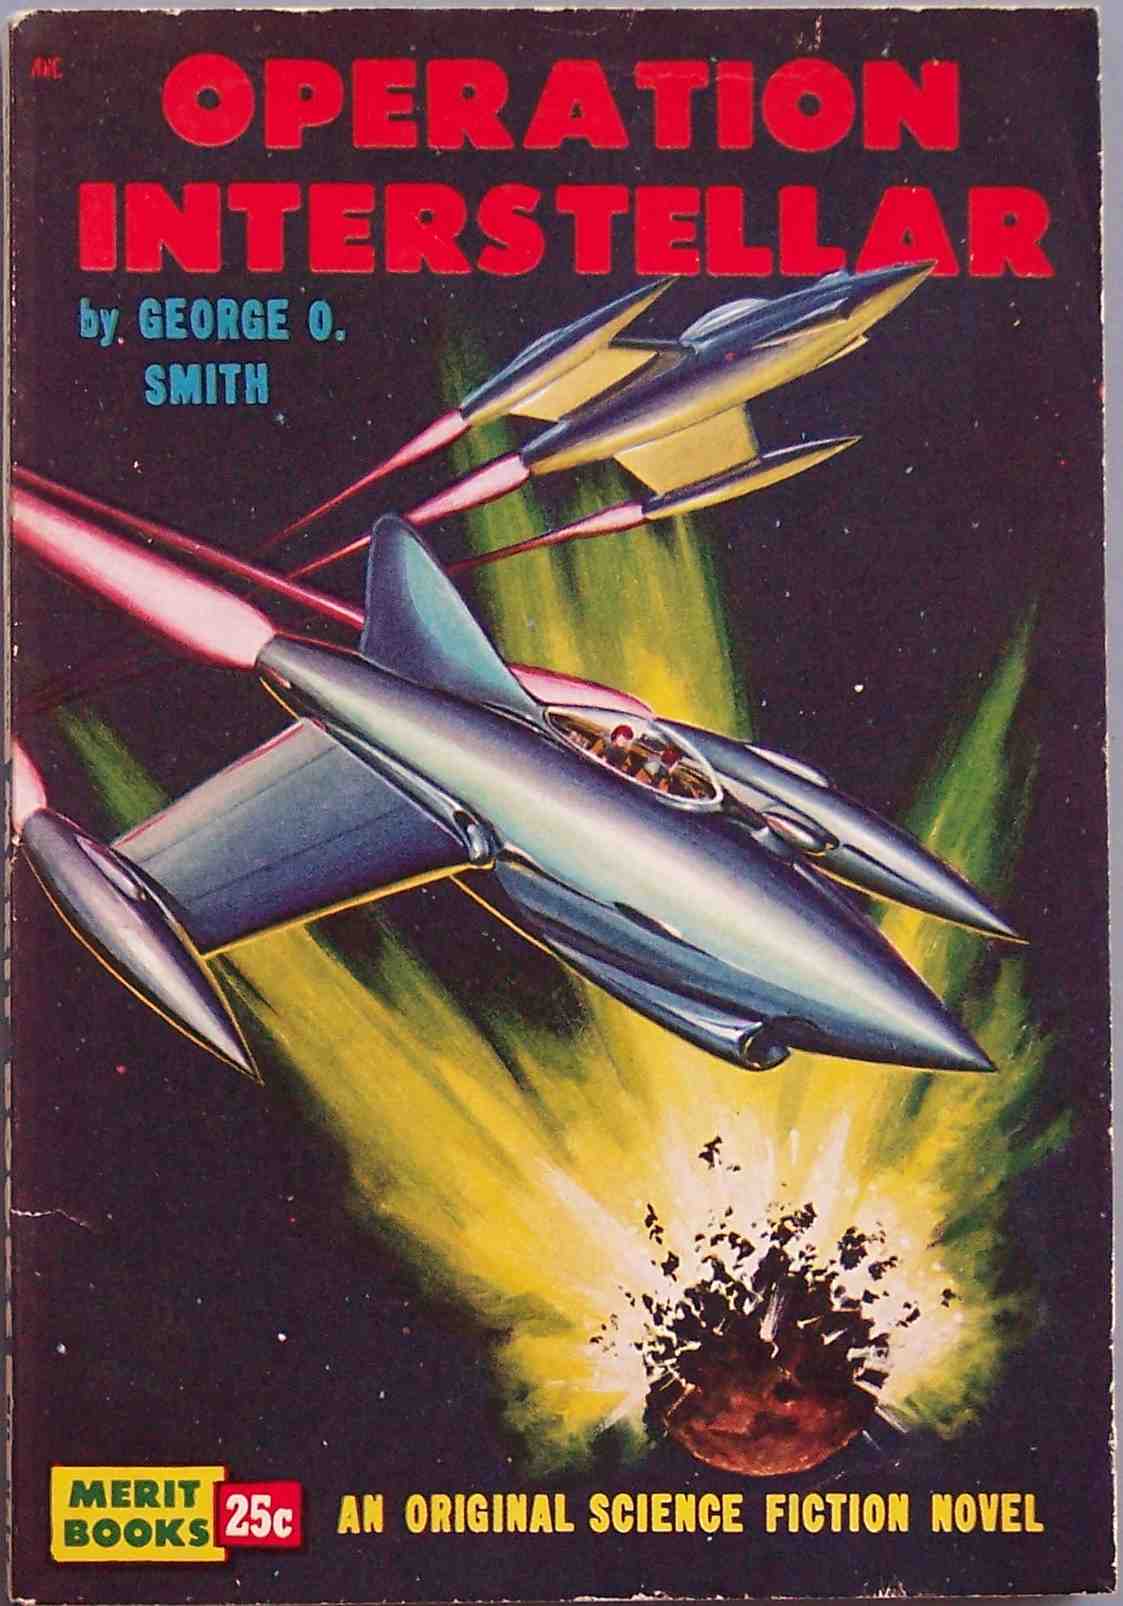 a cover art for the novel operation interstellar by george d smith